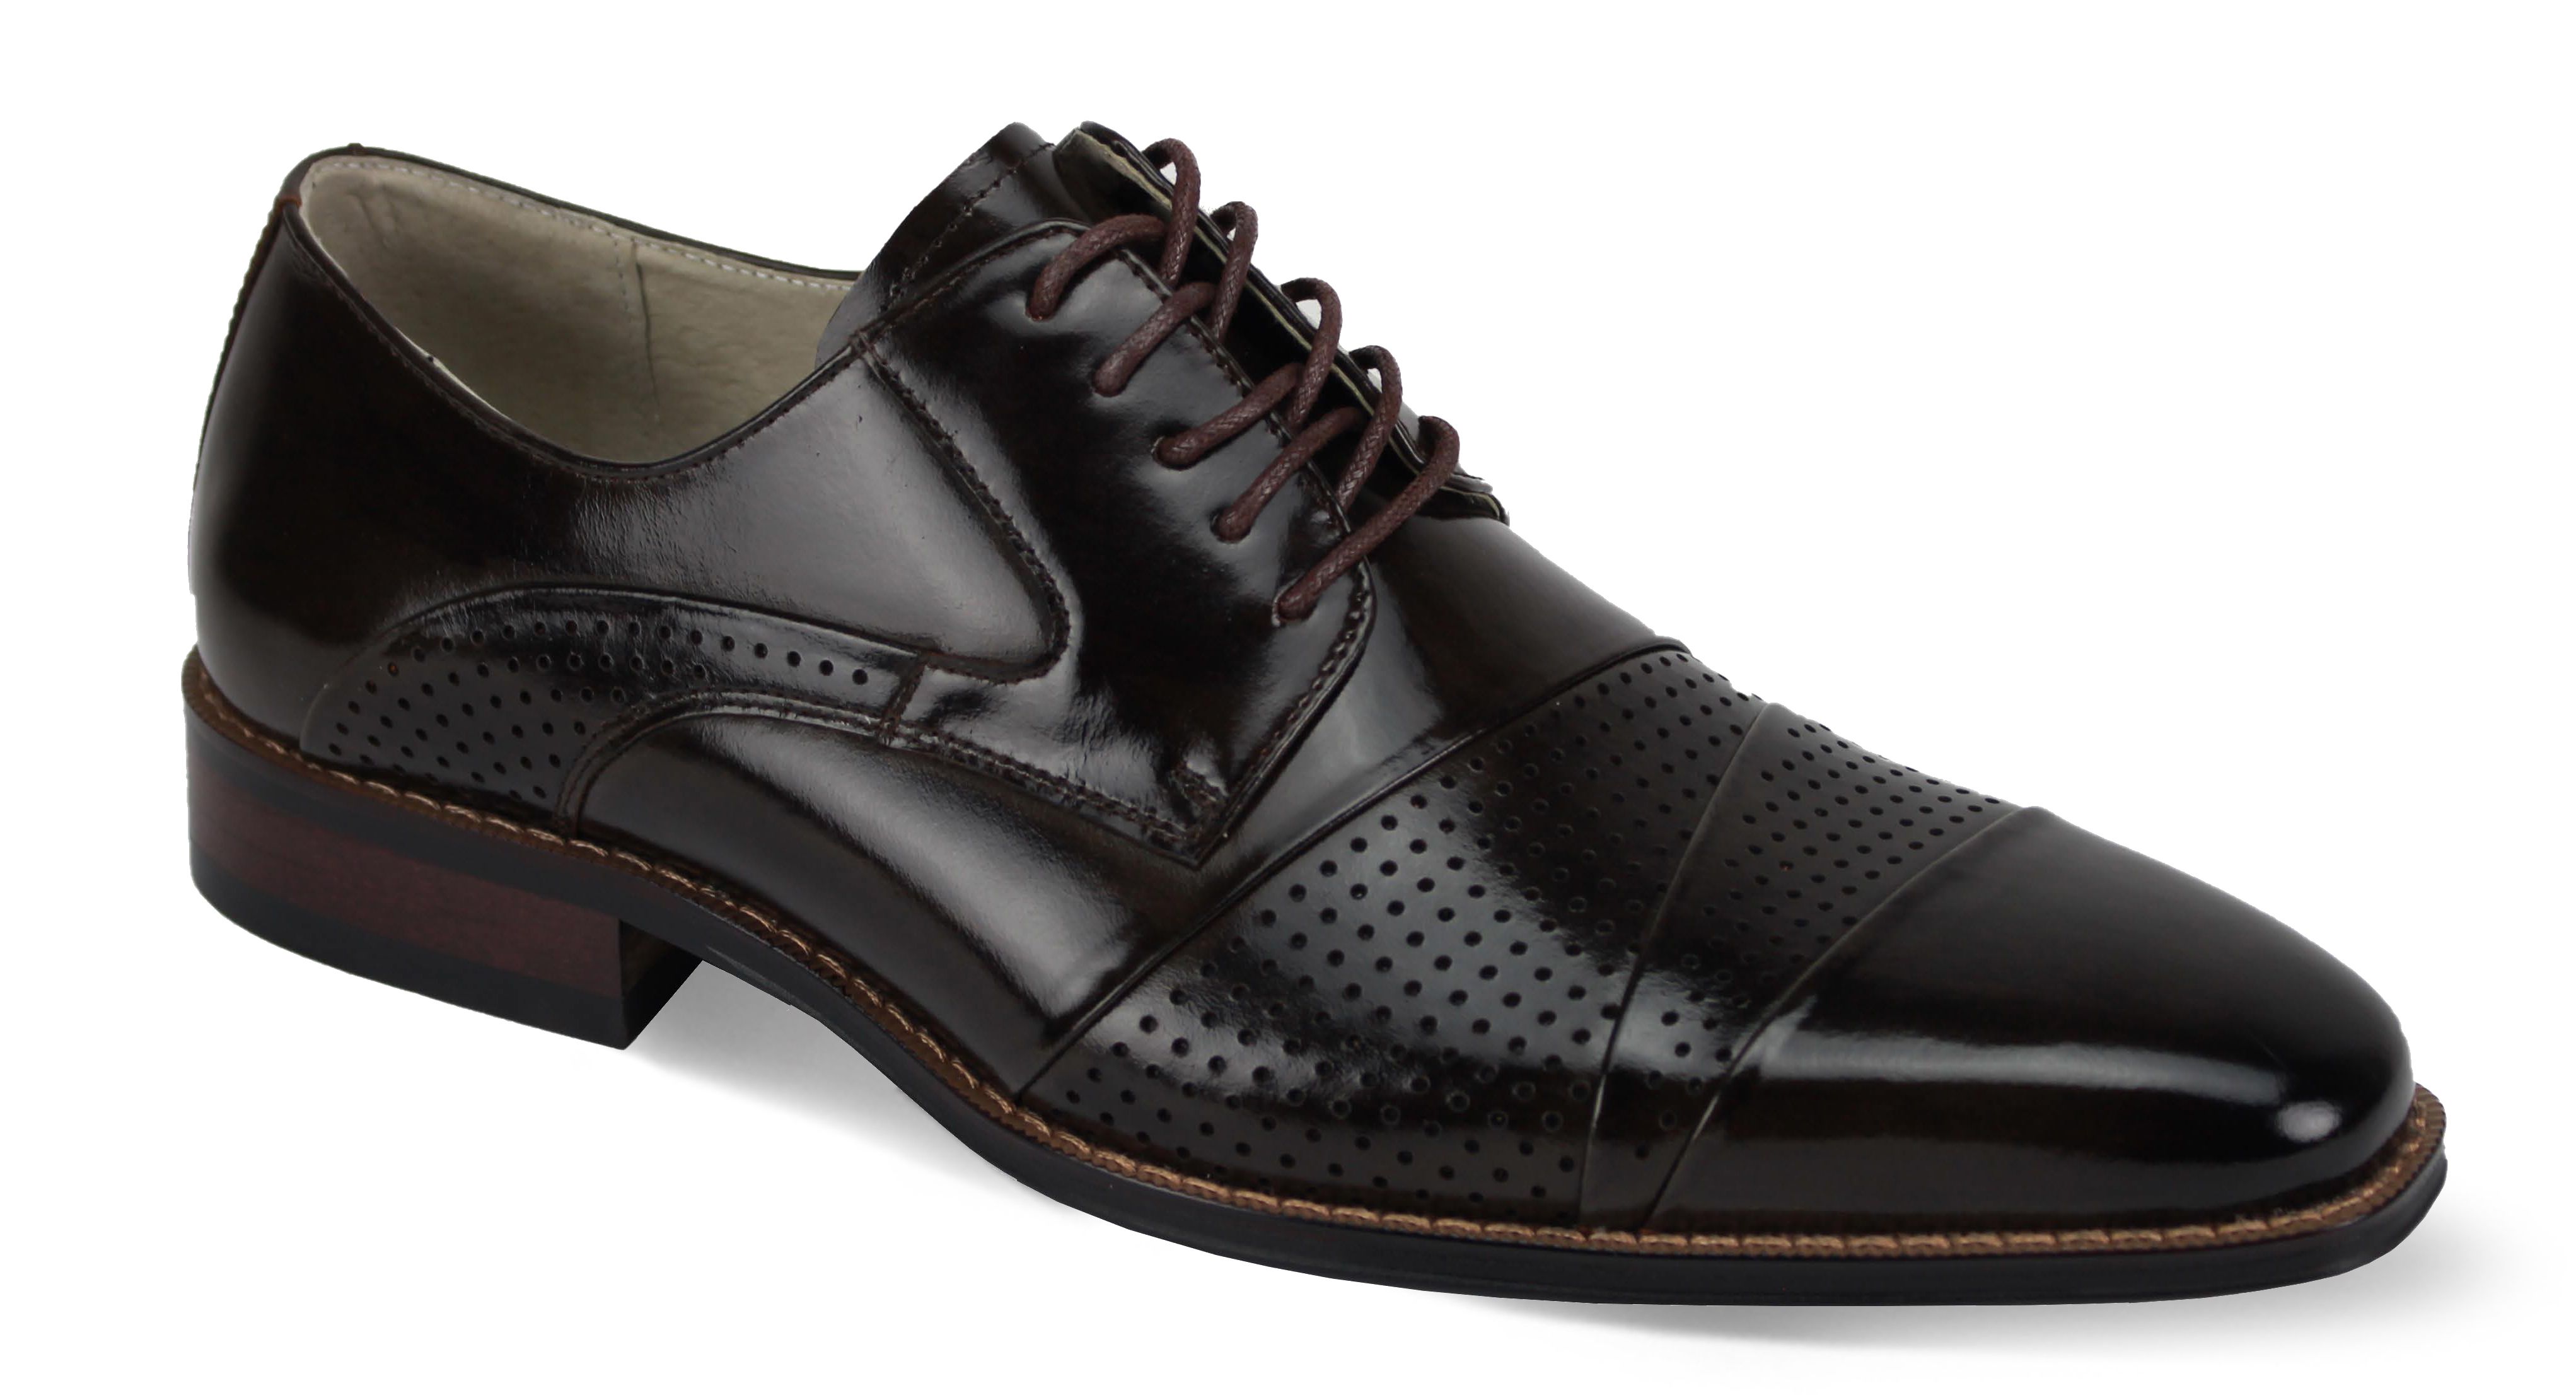 Giovanni Men's Outlet Leather Dress Shoe - Layered Perforations